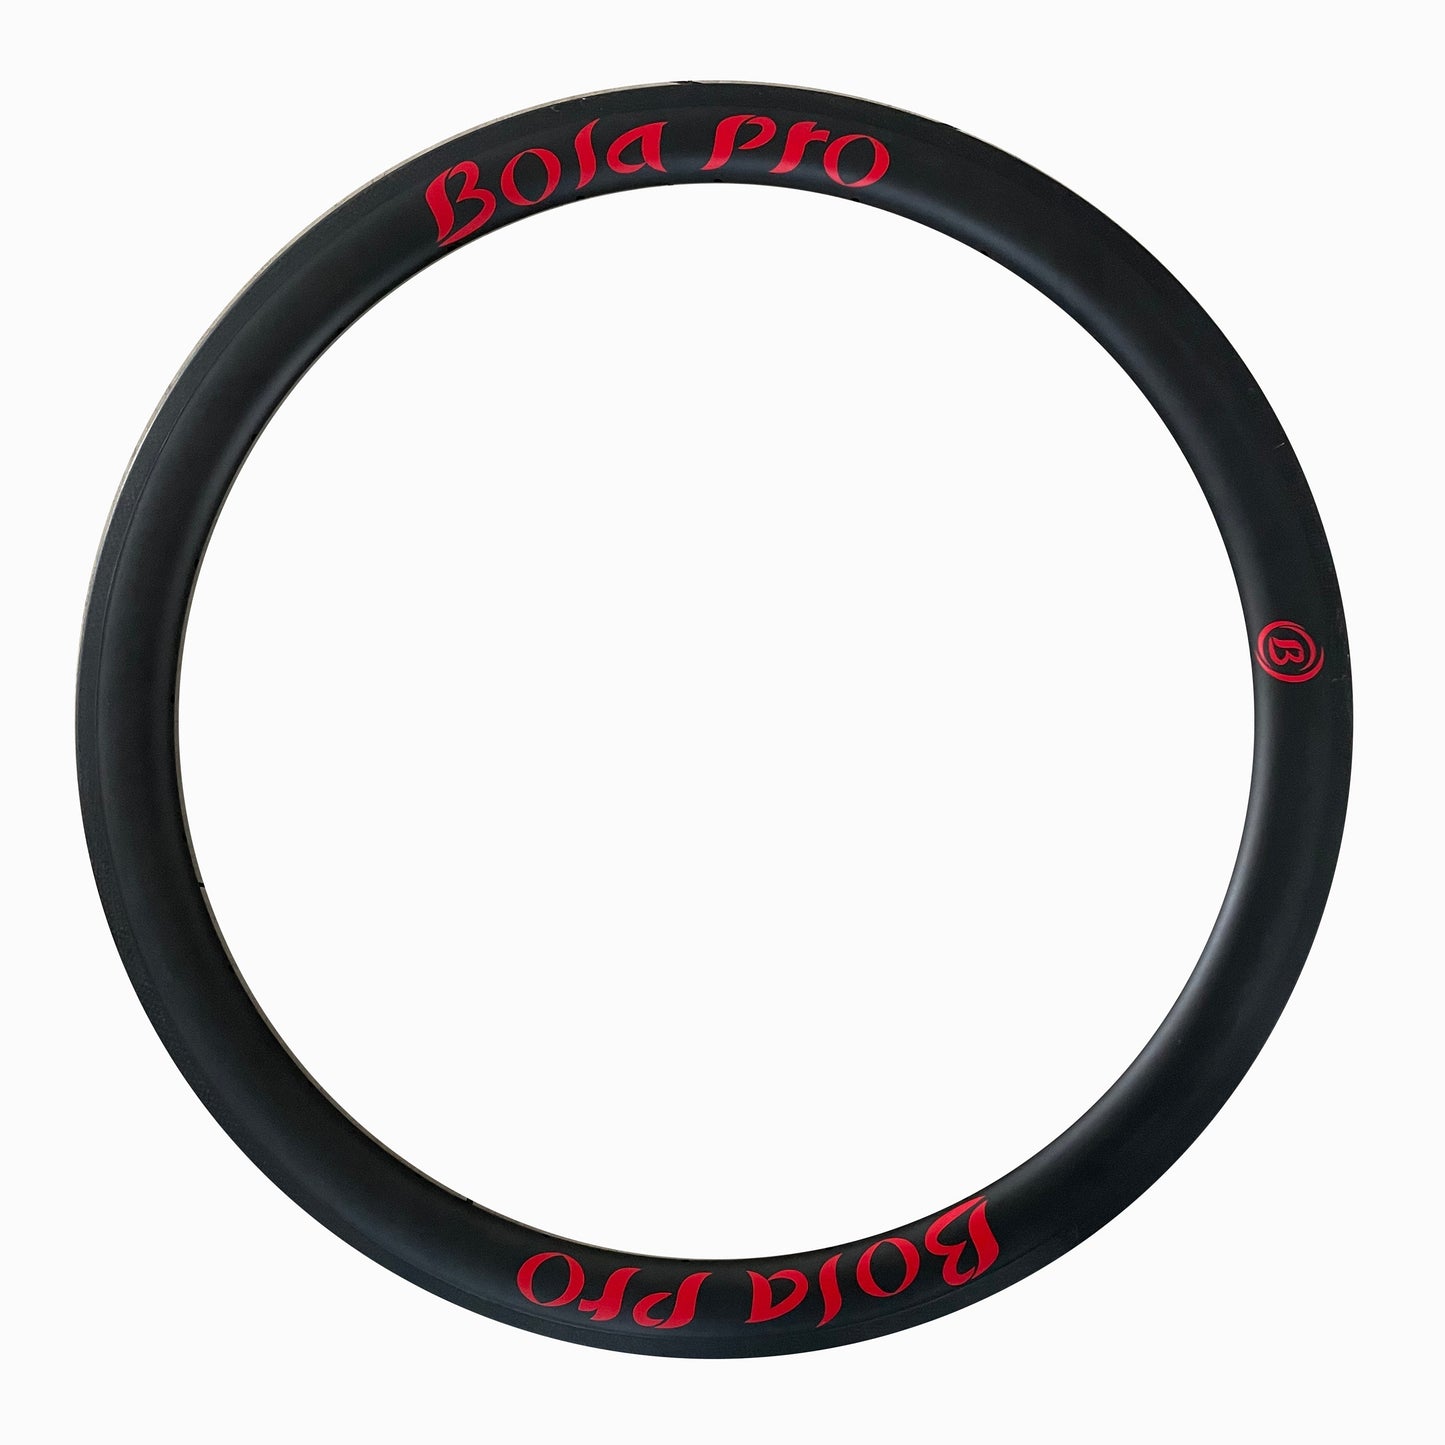 650B asymmetric velo tubeless ready carbon gravel bike rim 30mm low profile 30mm outer wide 24mm or 25mm inner wide  with hook or hookless design